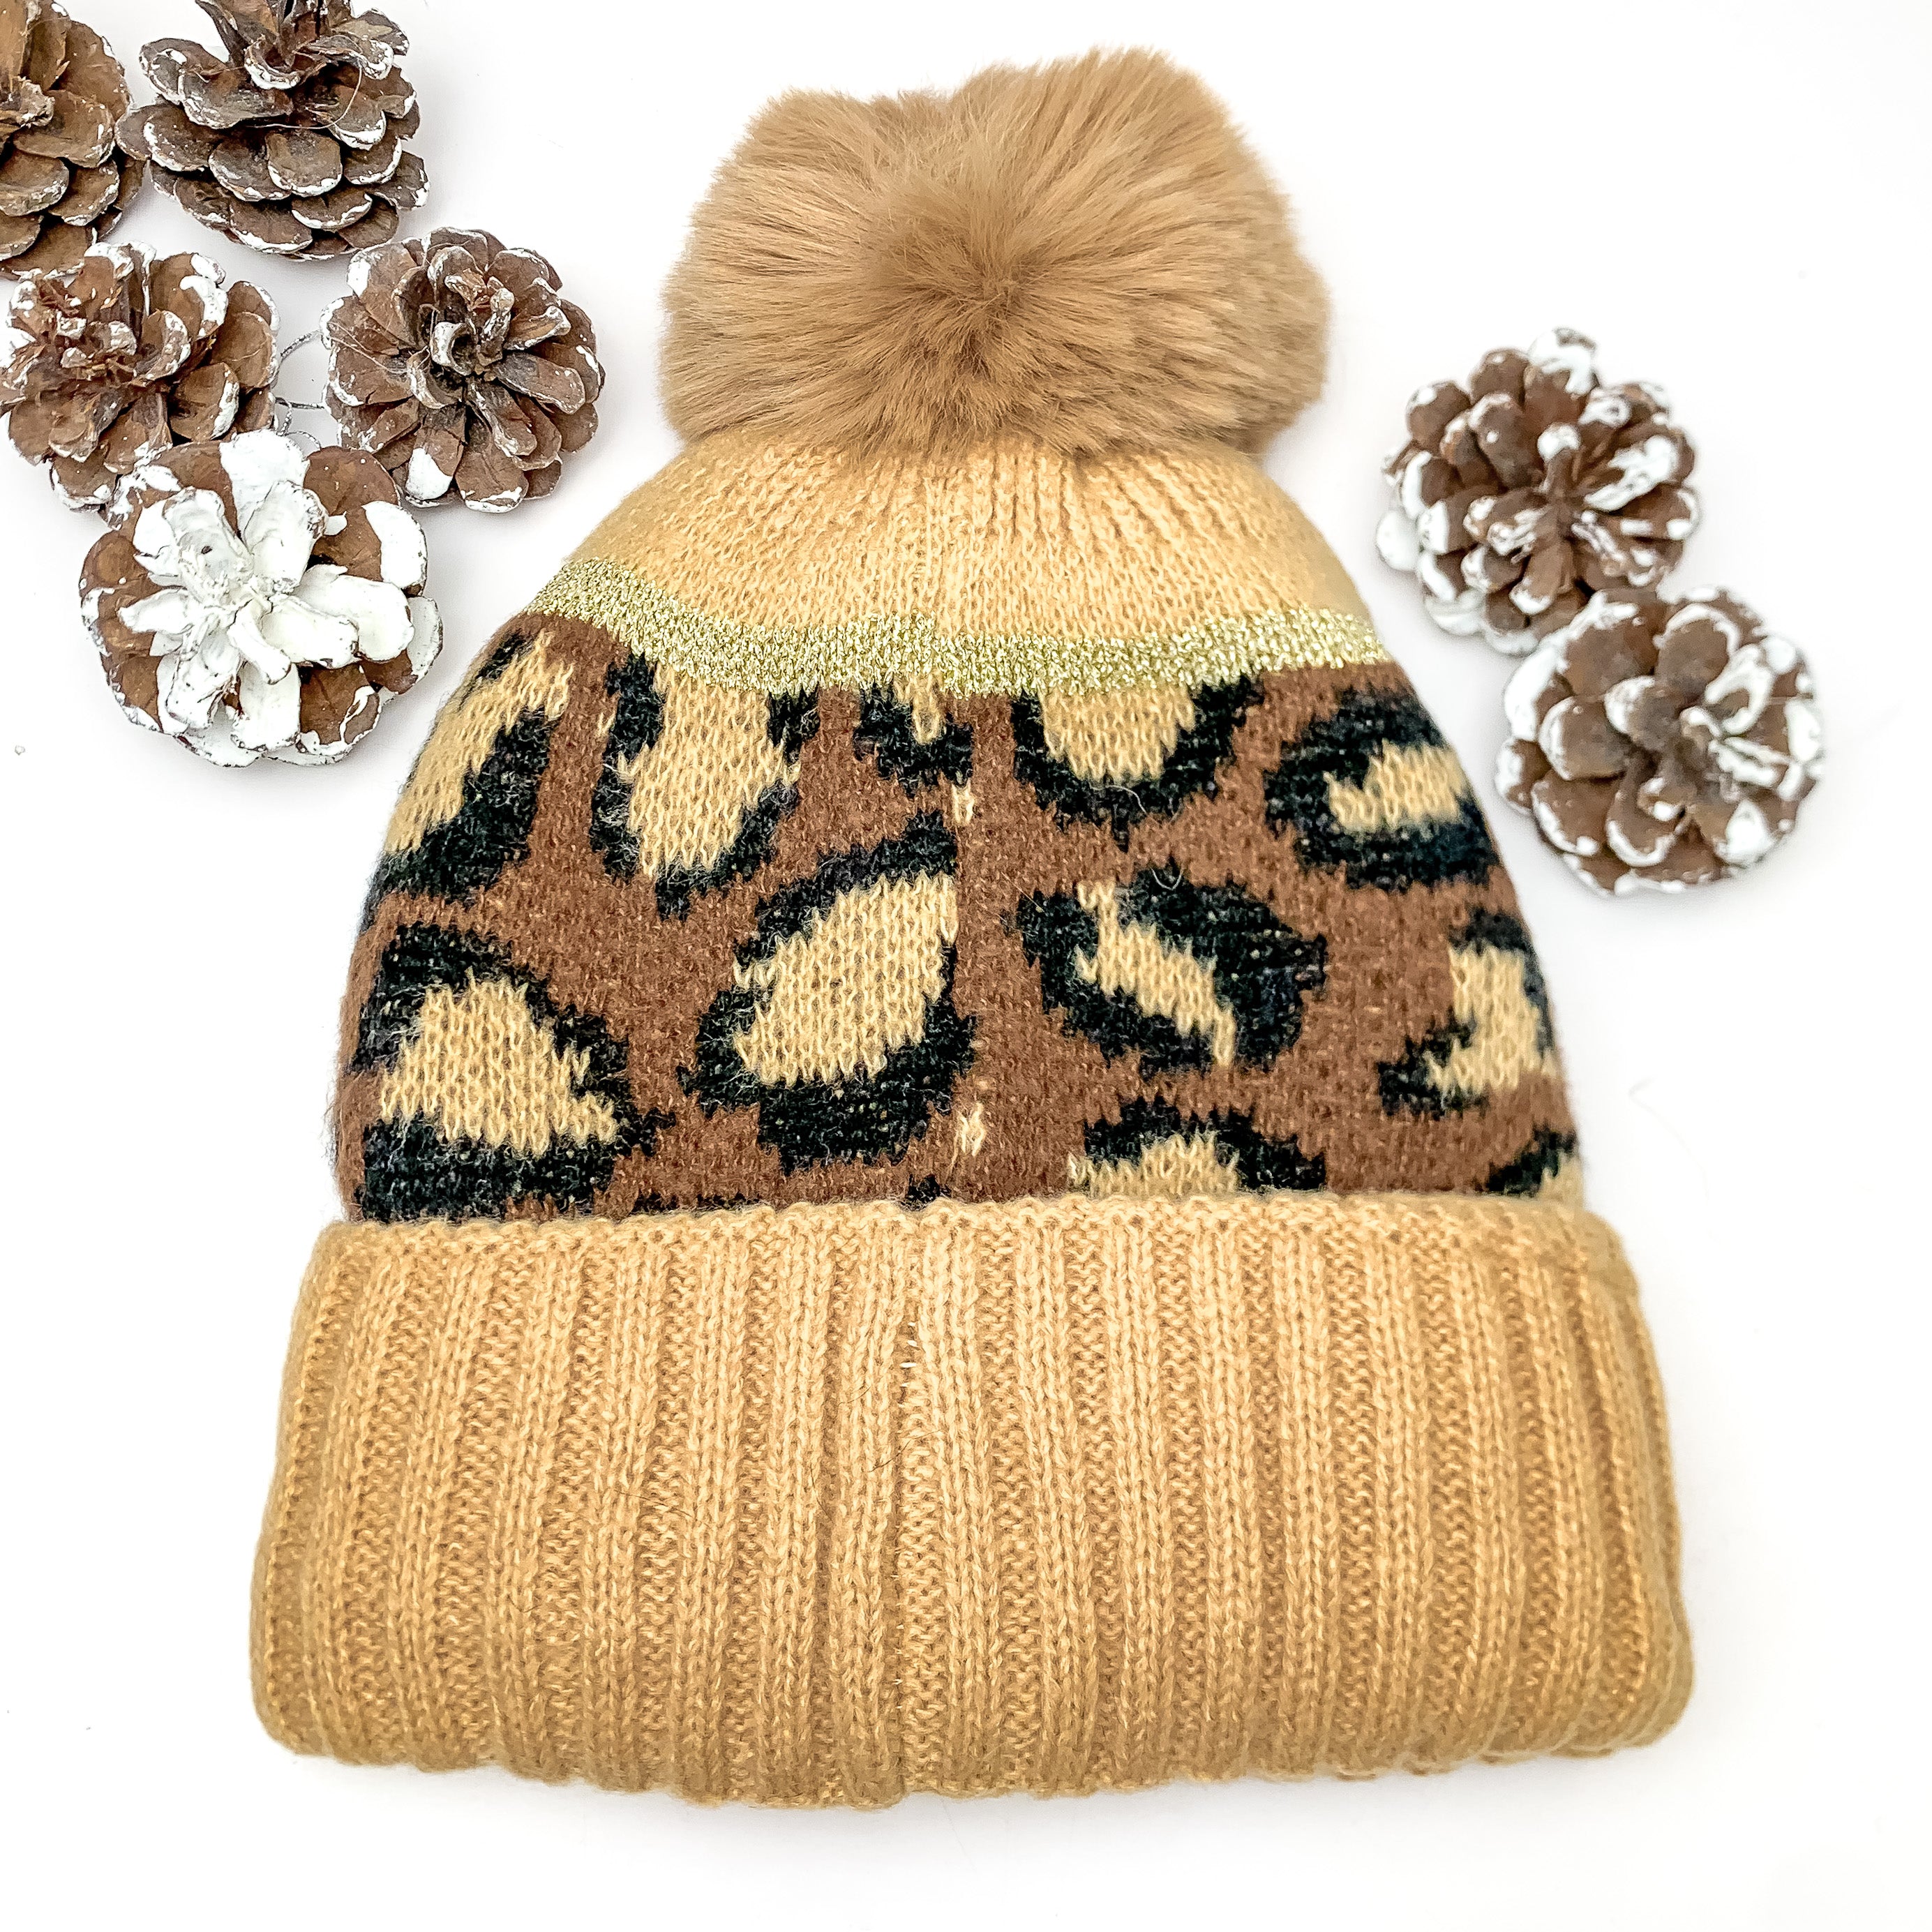 Lucky Leopard Beanie in Dark Brown and Beige. This beanie is pictured on a white background with pinecones surrounding it. 